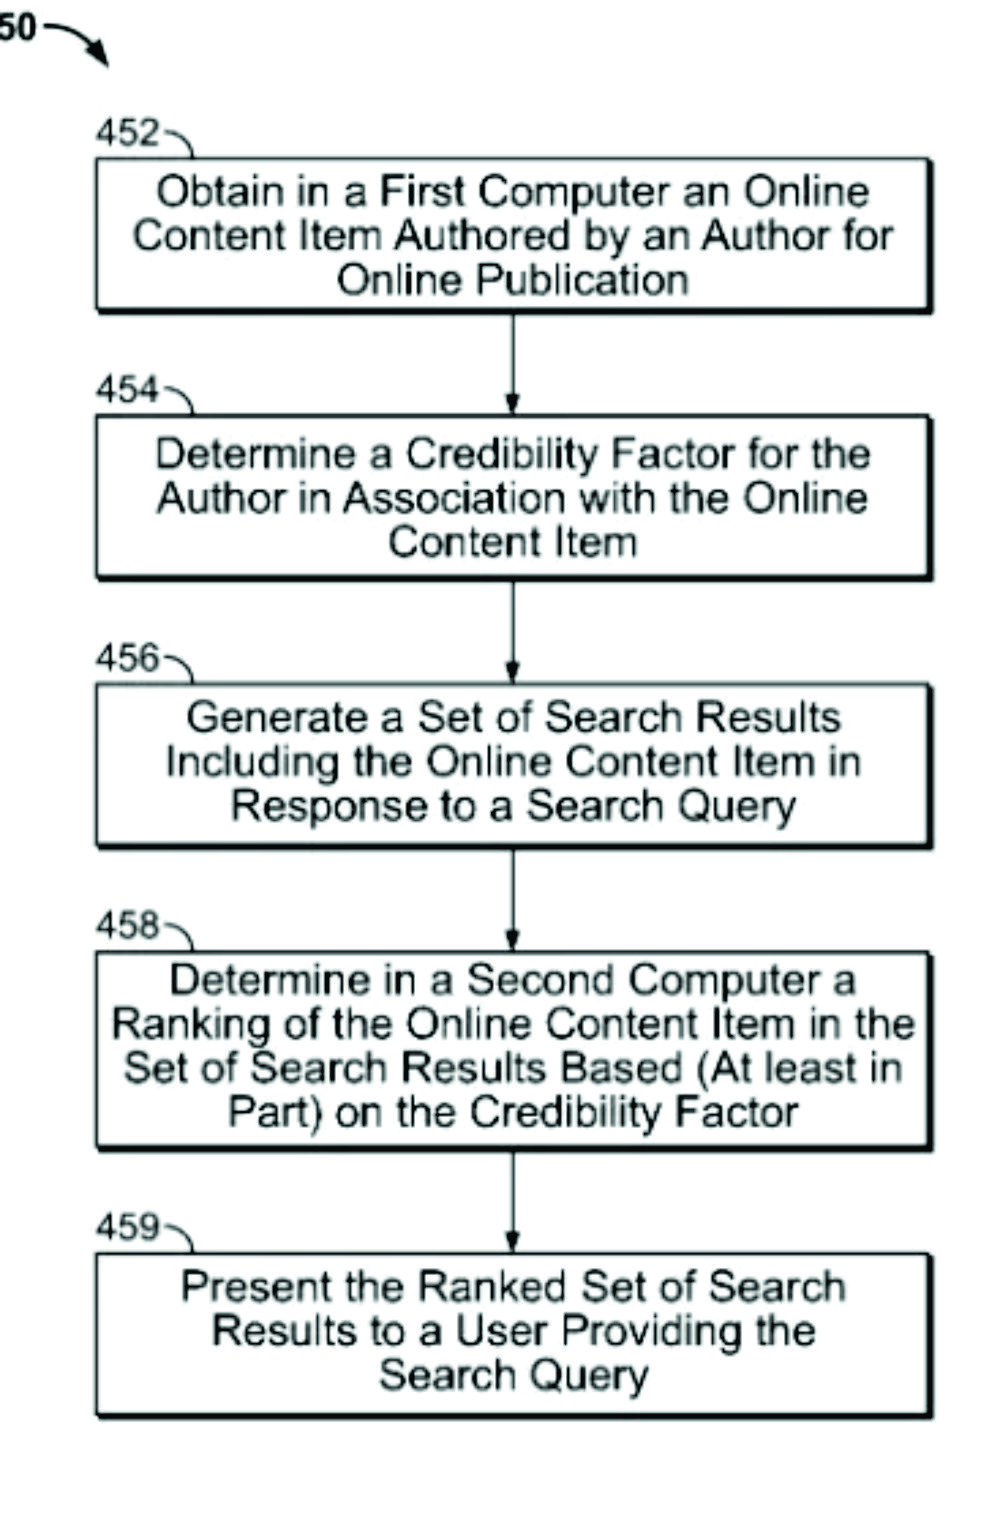 The credibility of an author of online content